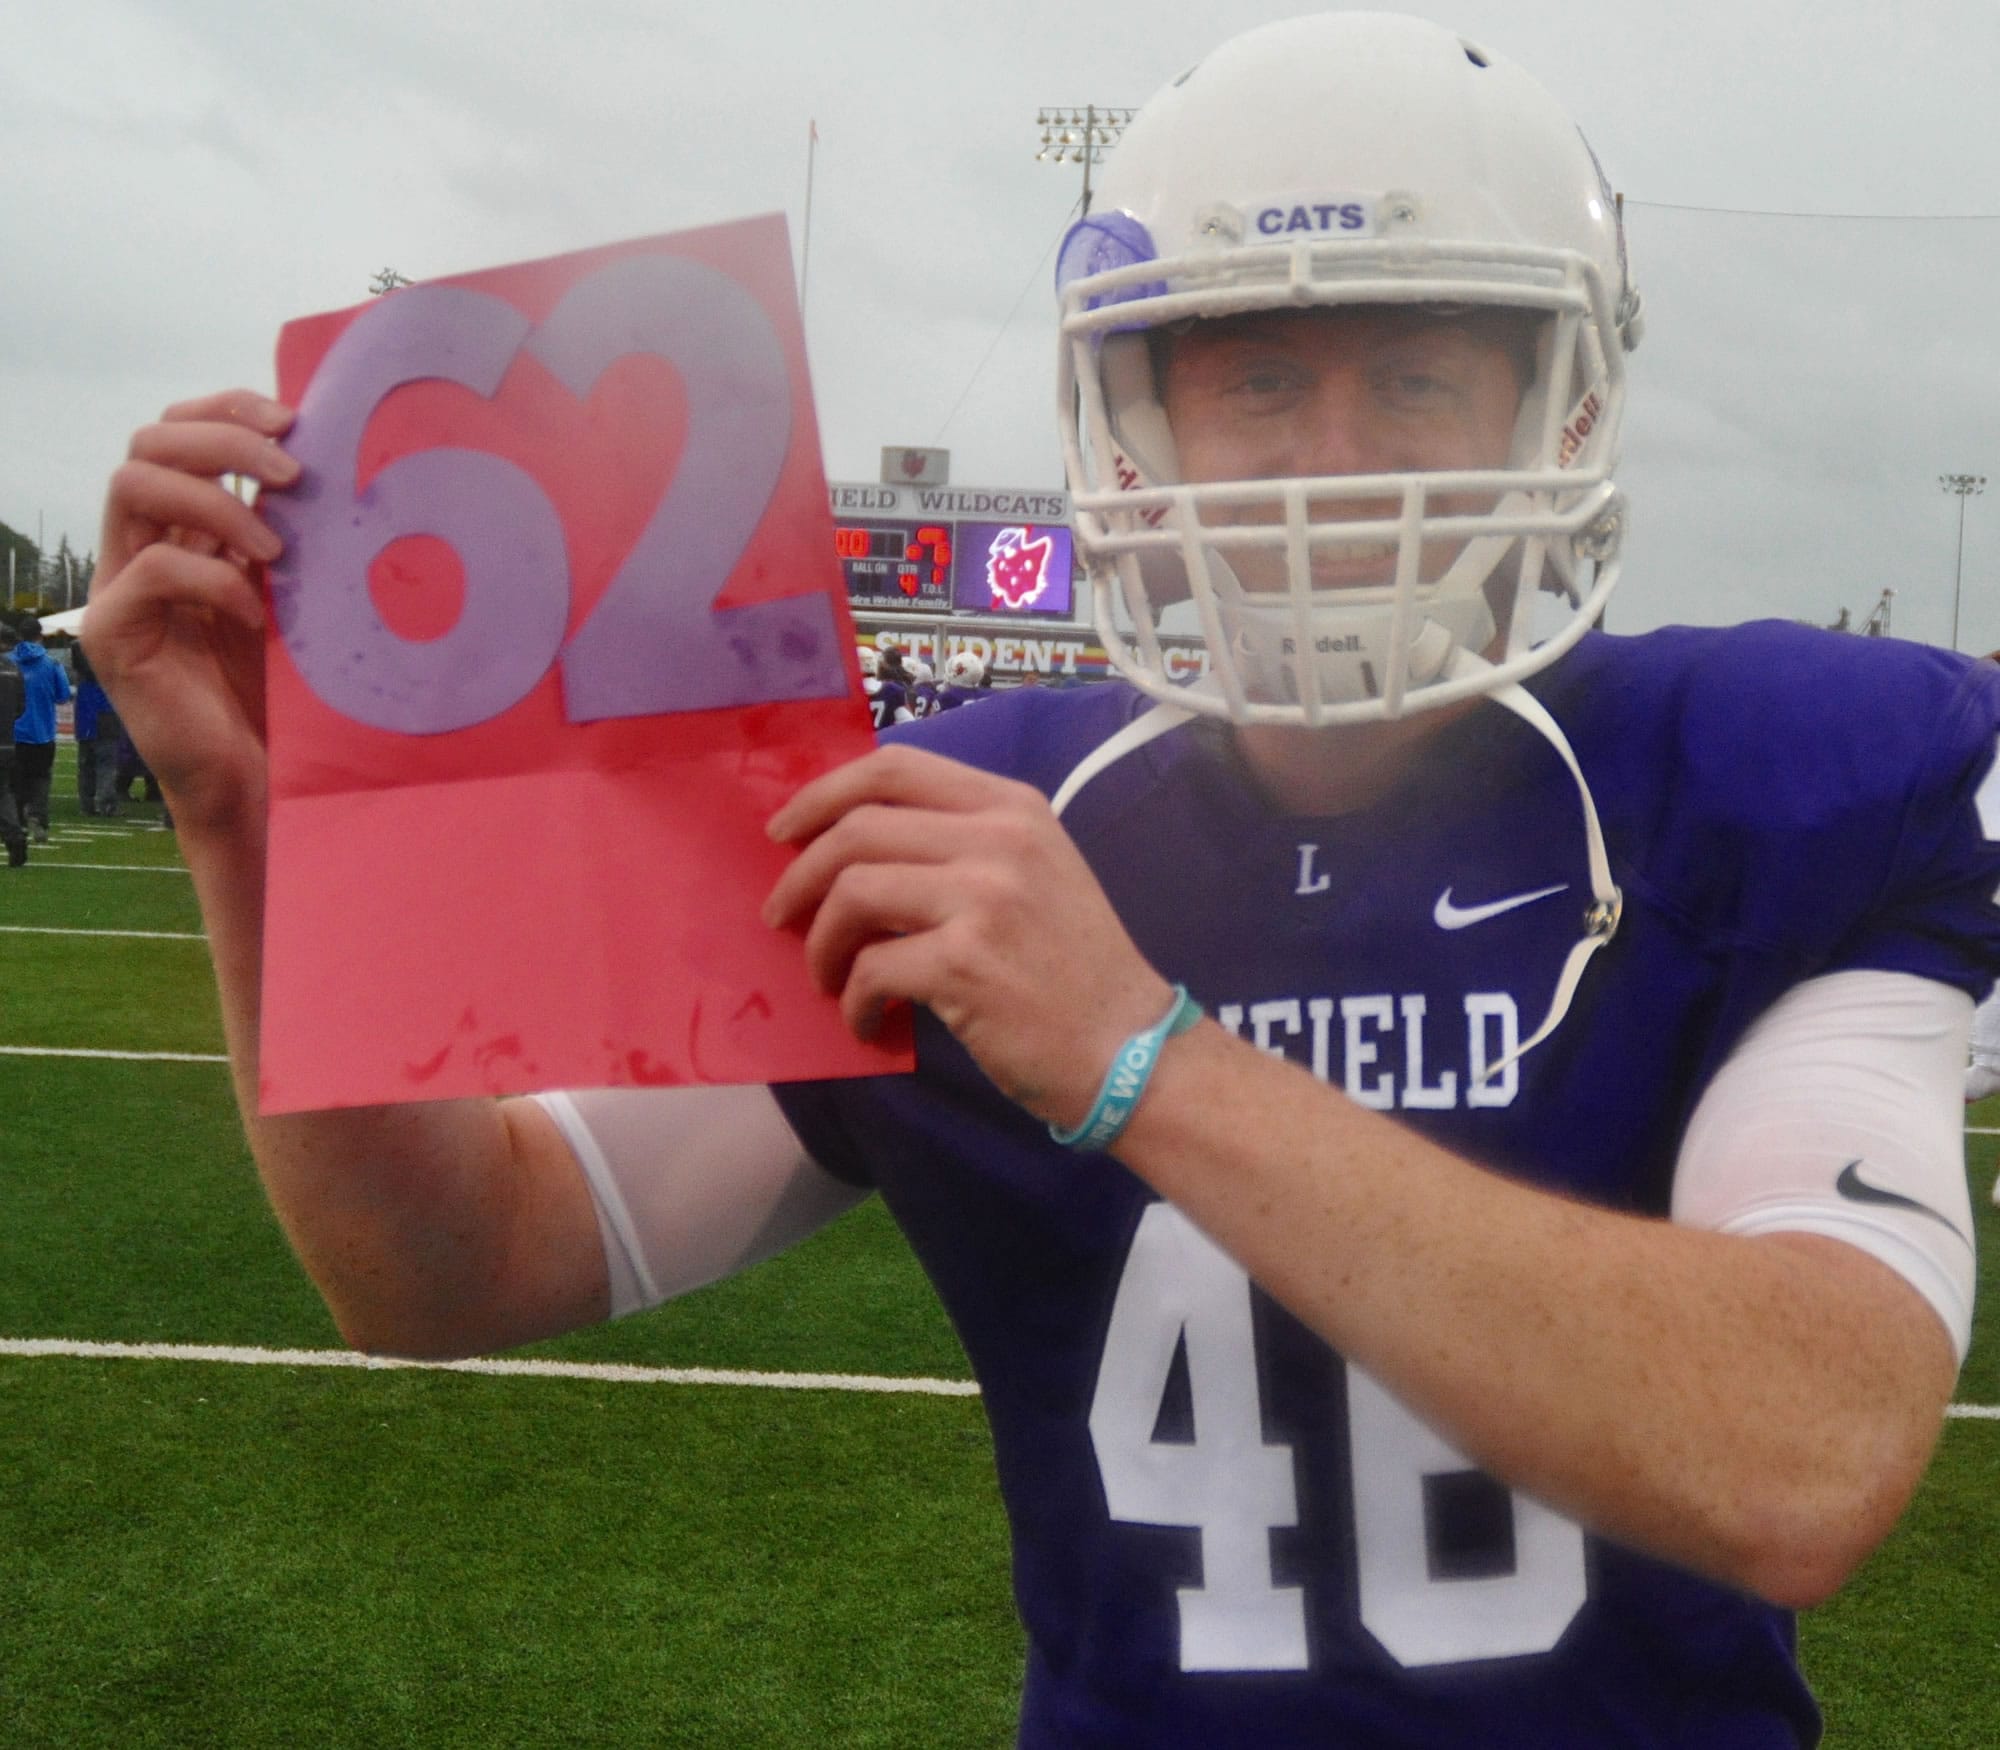 Linfield kicker Willy Warne holds a sign signifying the football program's 62nd consecutive winning season. Warne, a Mountain View High grad, made four field goals in a 12-6 win over George Fox on Saturday, Oct. 21.